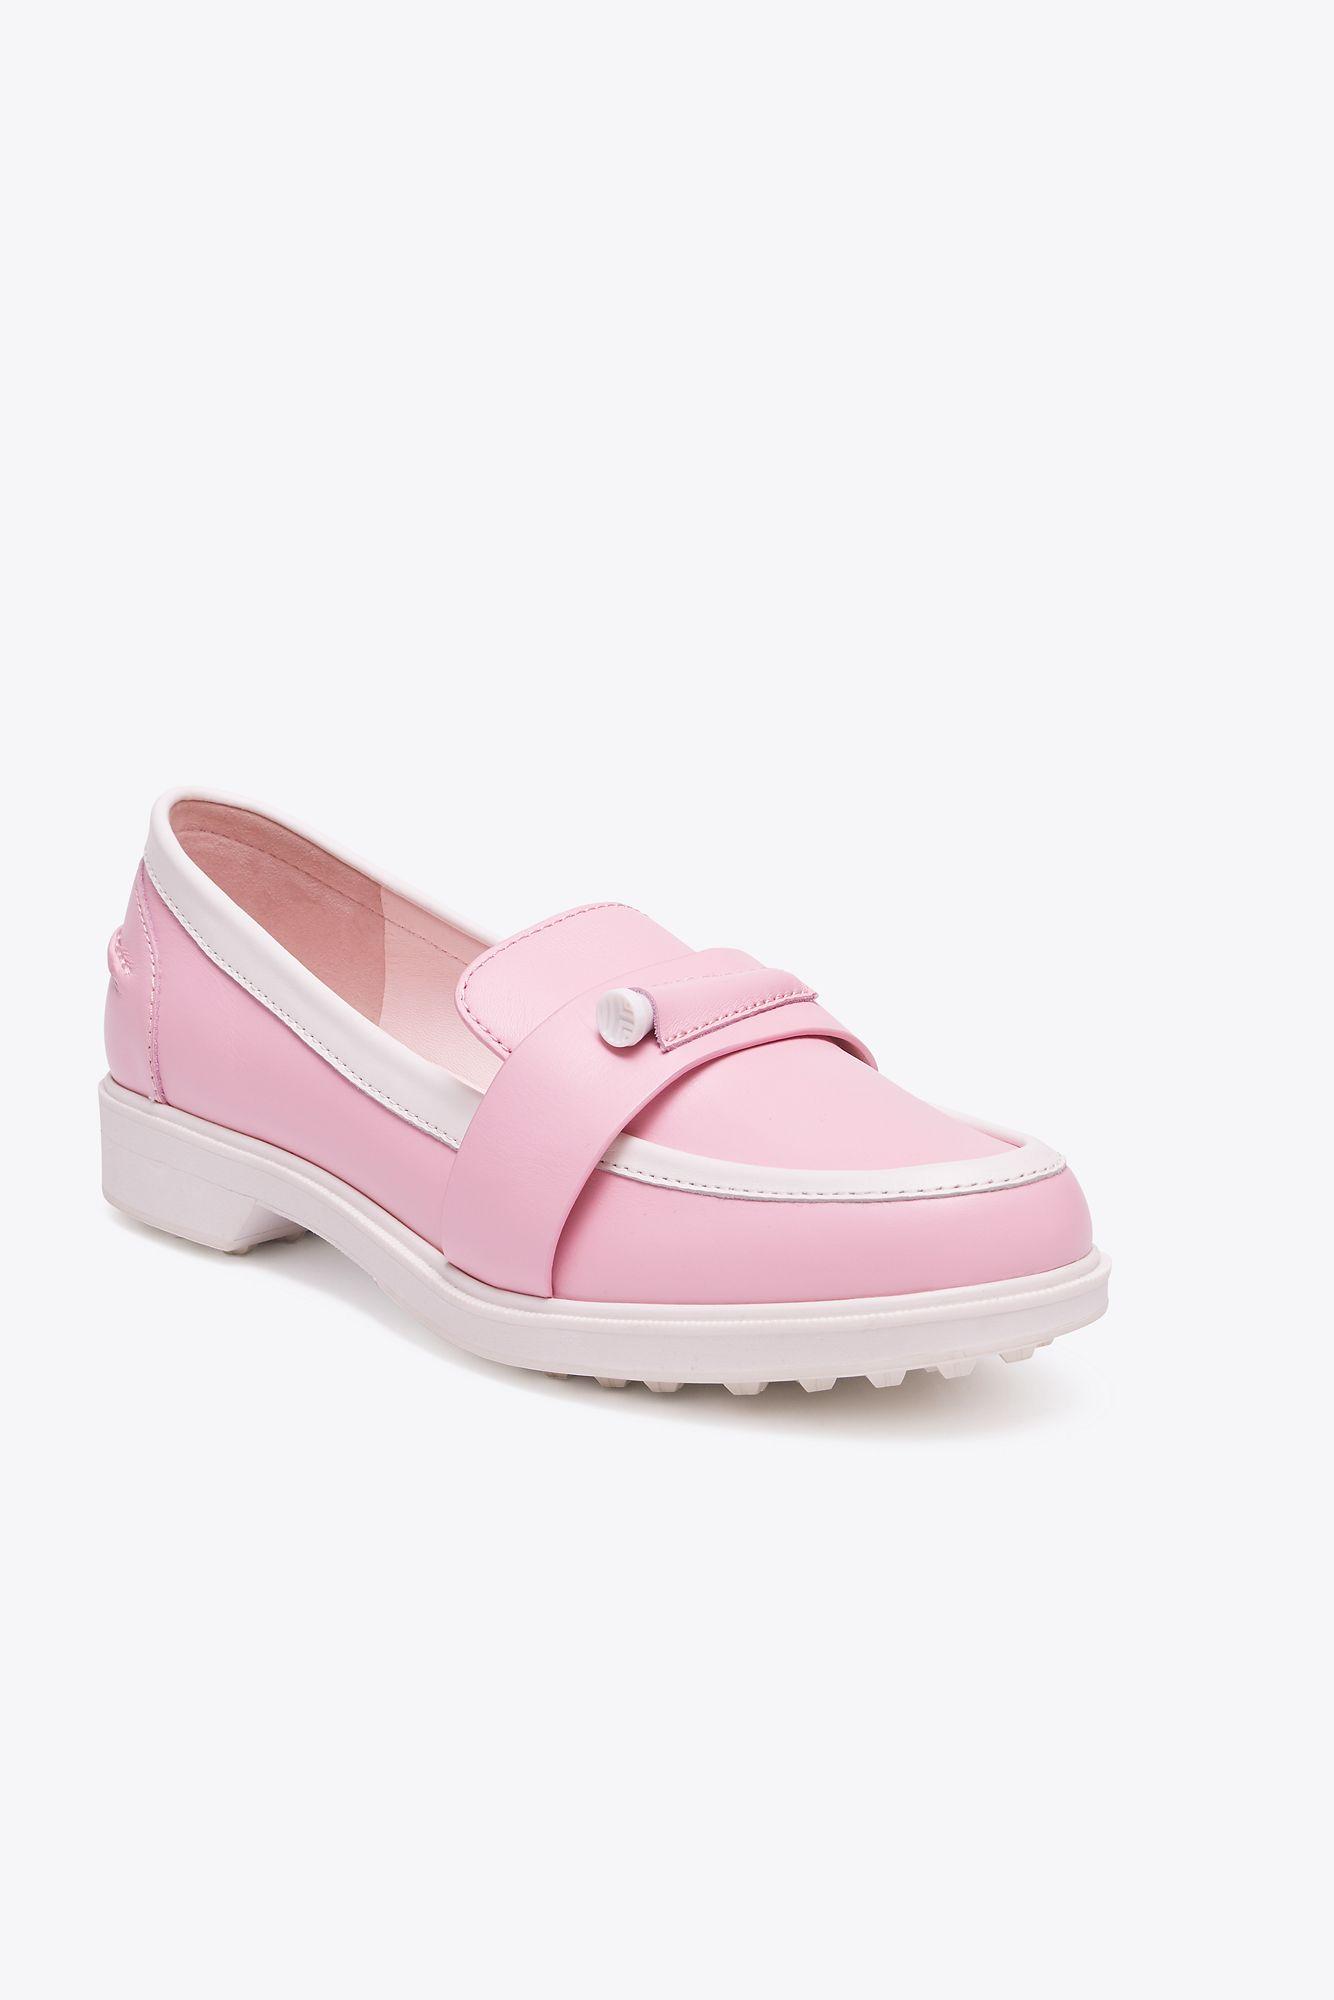 Tory Sport Pocket-tee Golf Loafers in Pink - Lyst